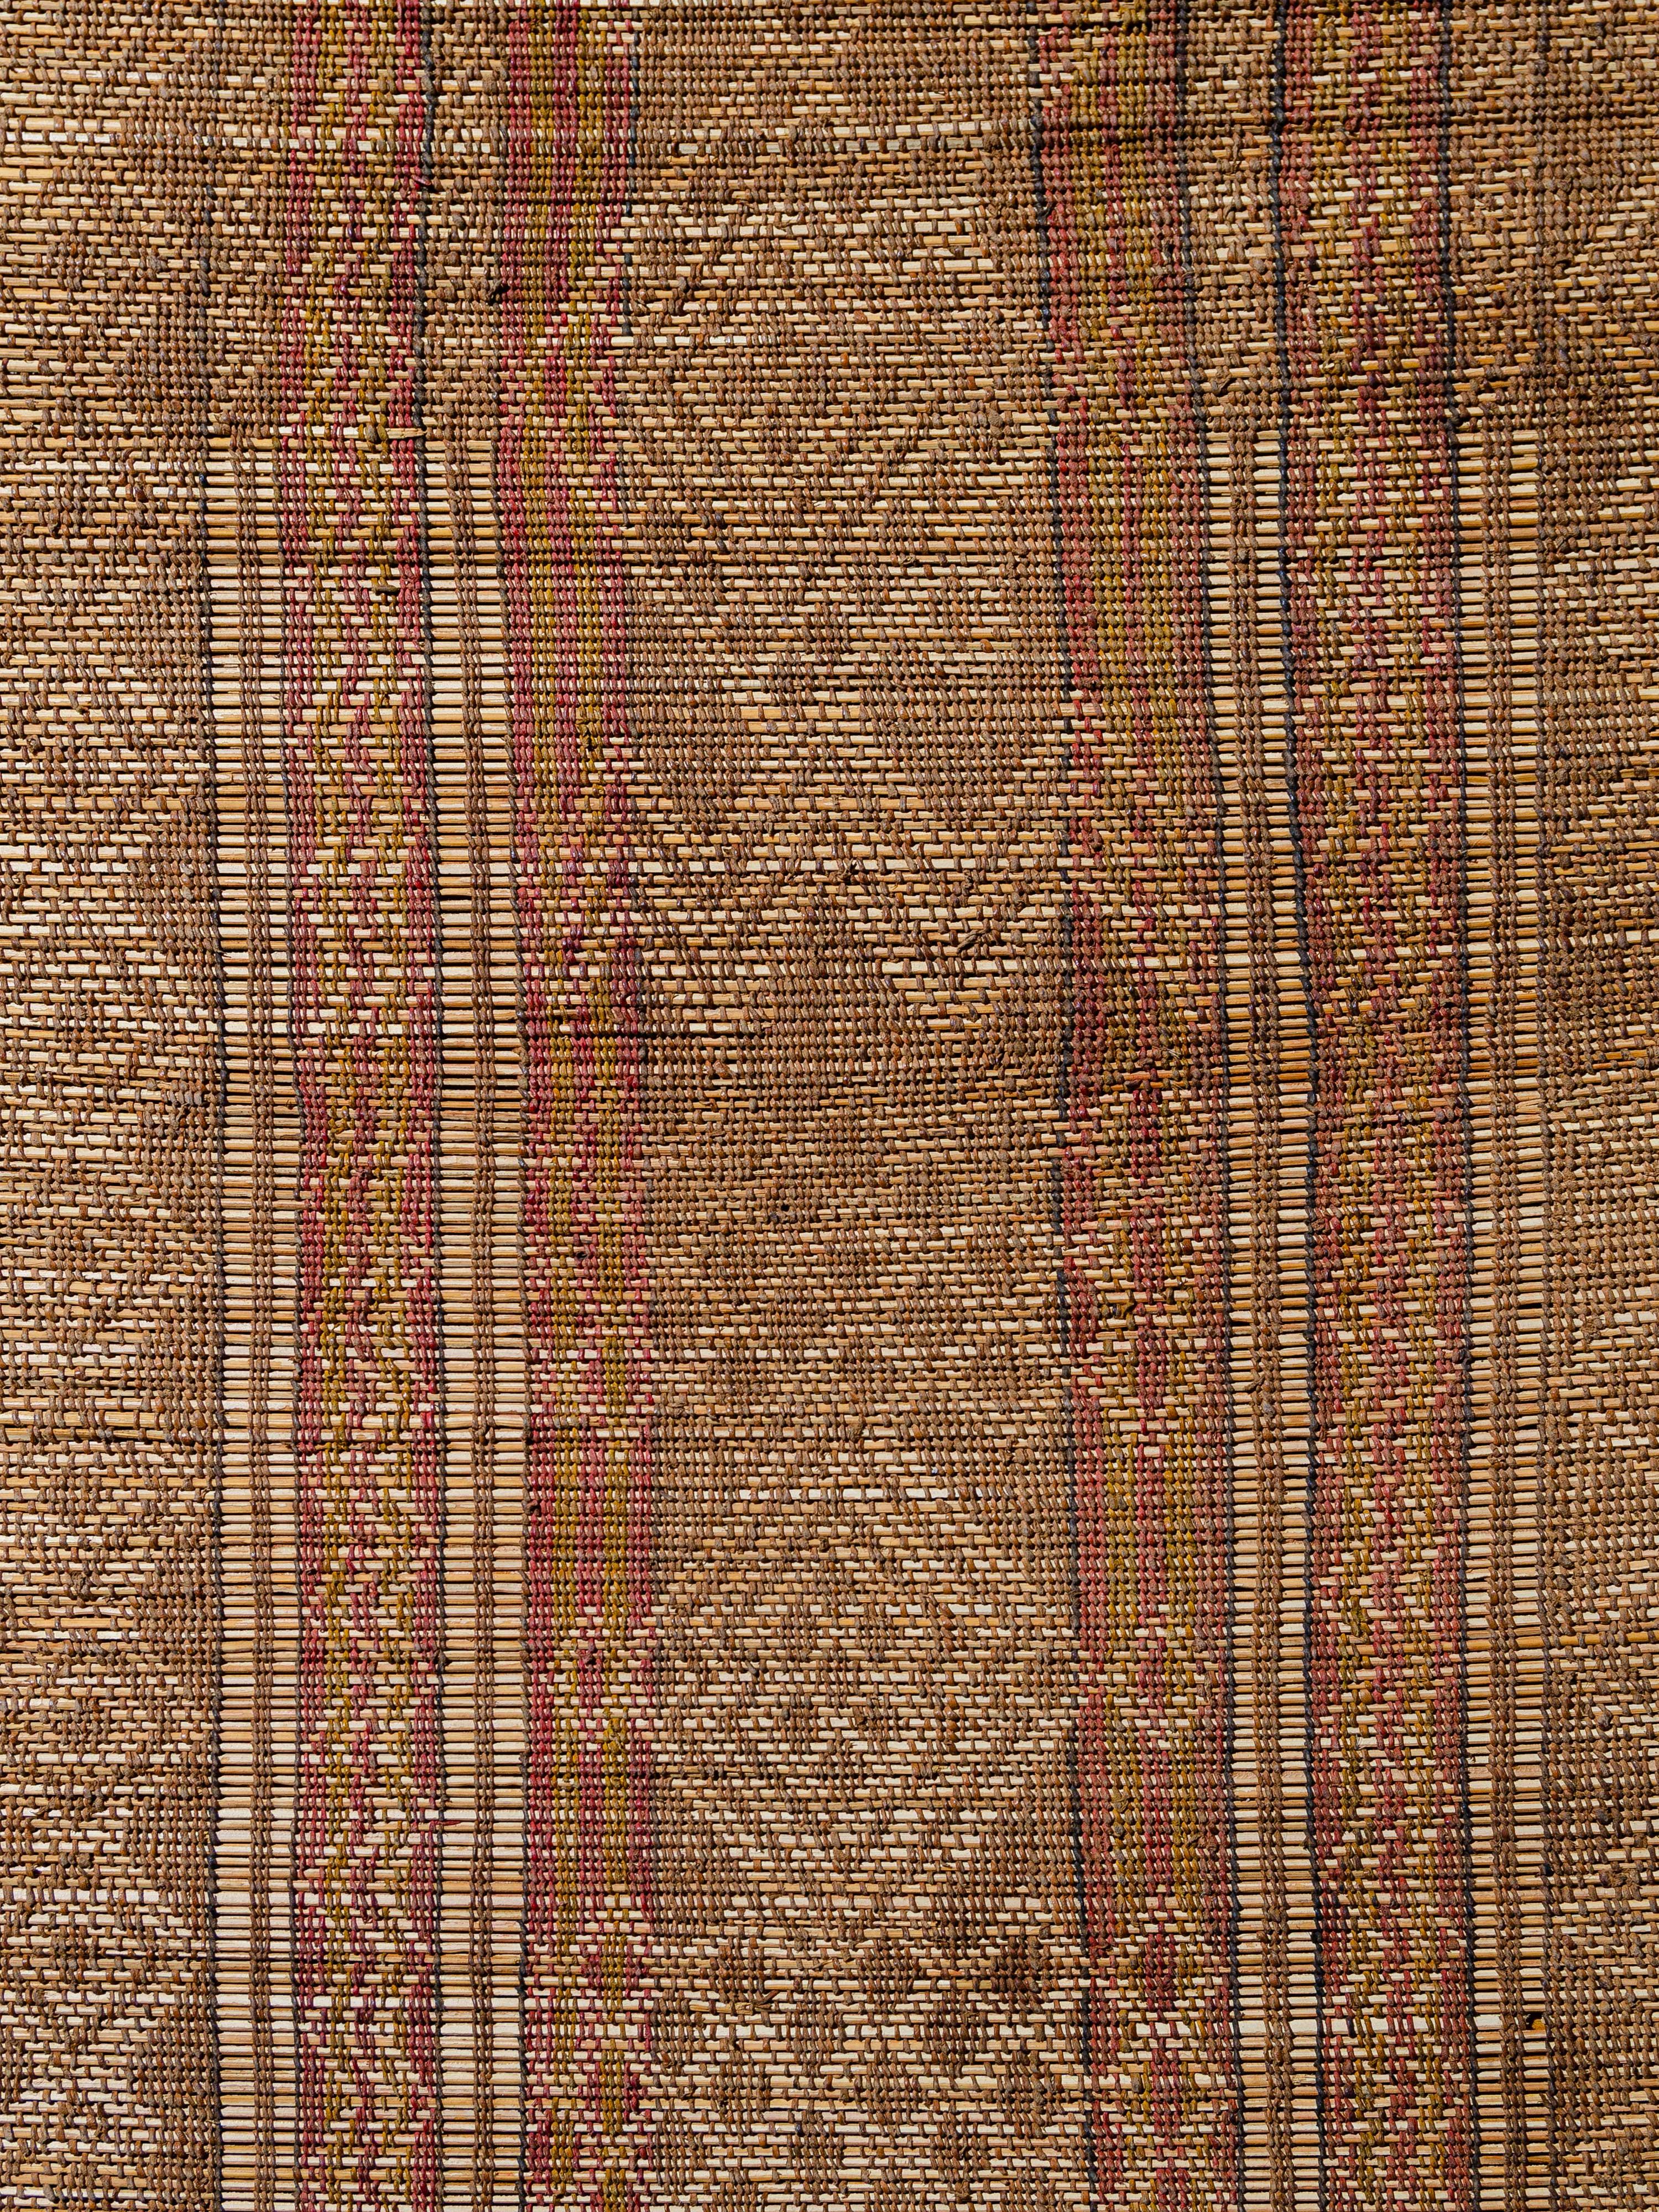 Woven by the nomadic Tuareg tribes of Mauritania with palm reed and camel leather, Tuareg mats offer an alternative to a traditional woven textile floor coverings. This example features vertical bands of intricate motifs, with lozenges, meandering